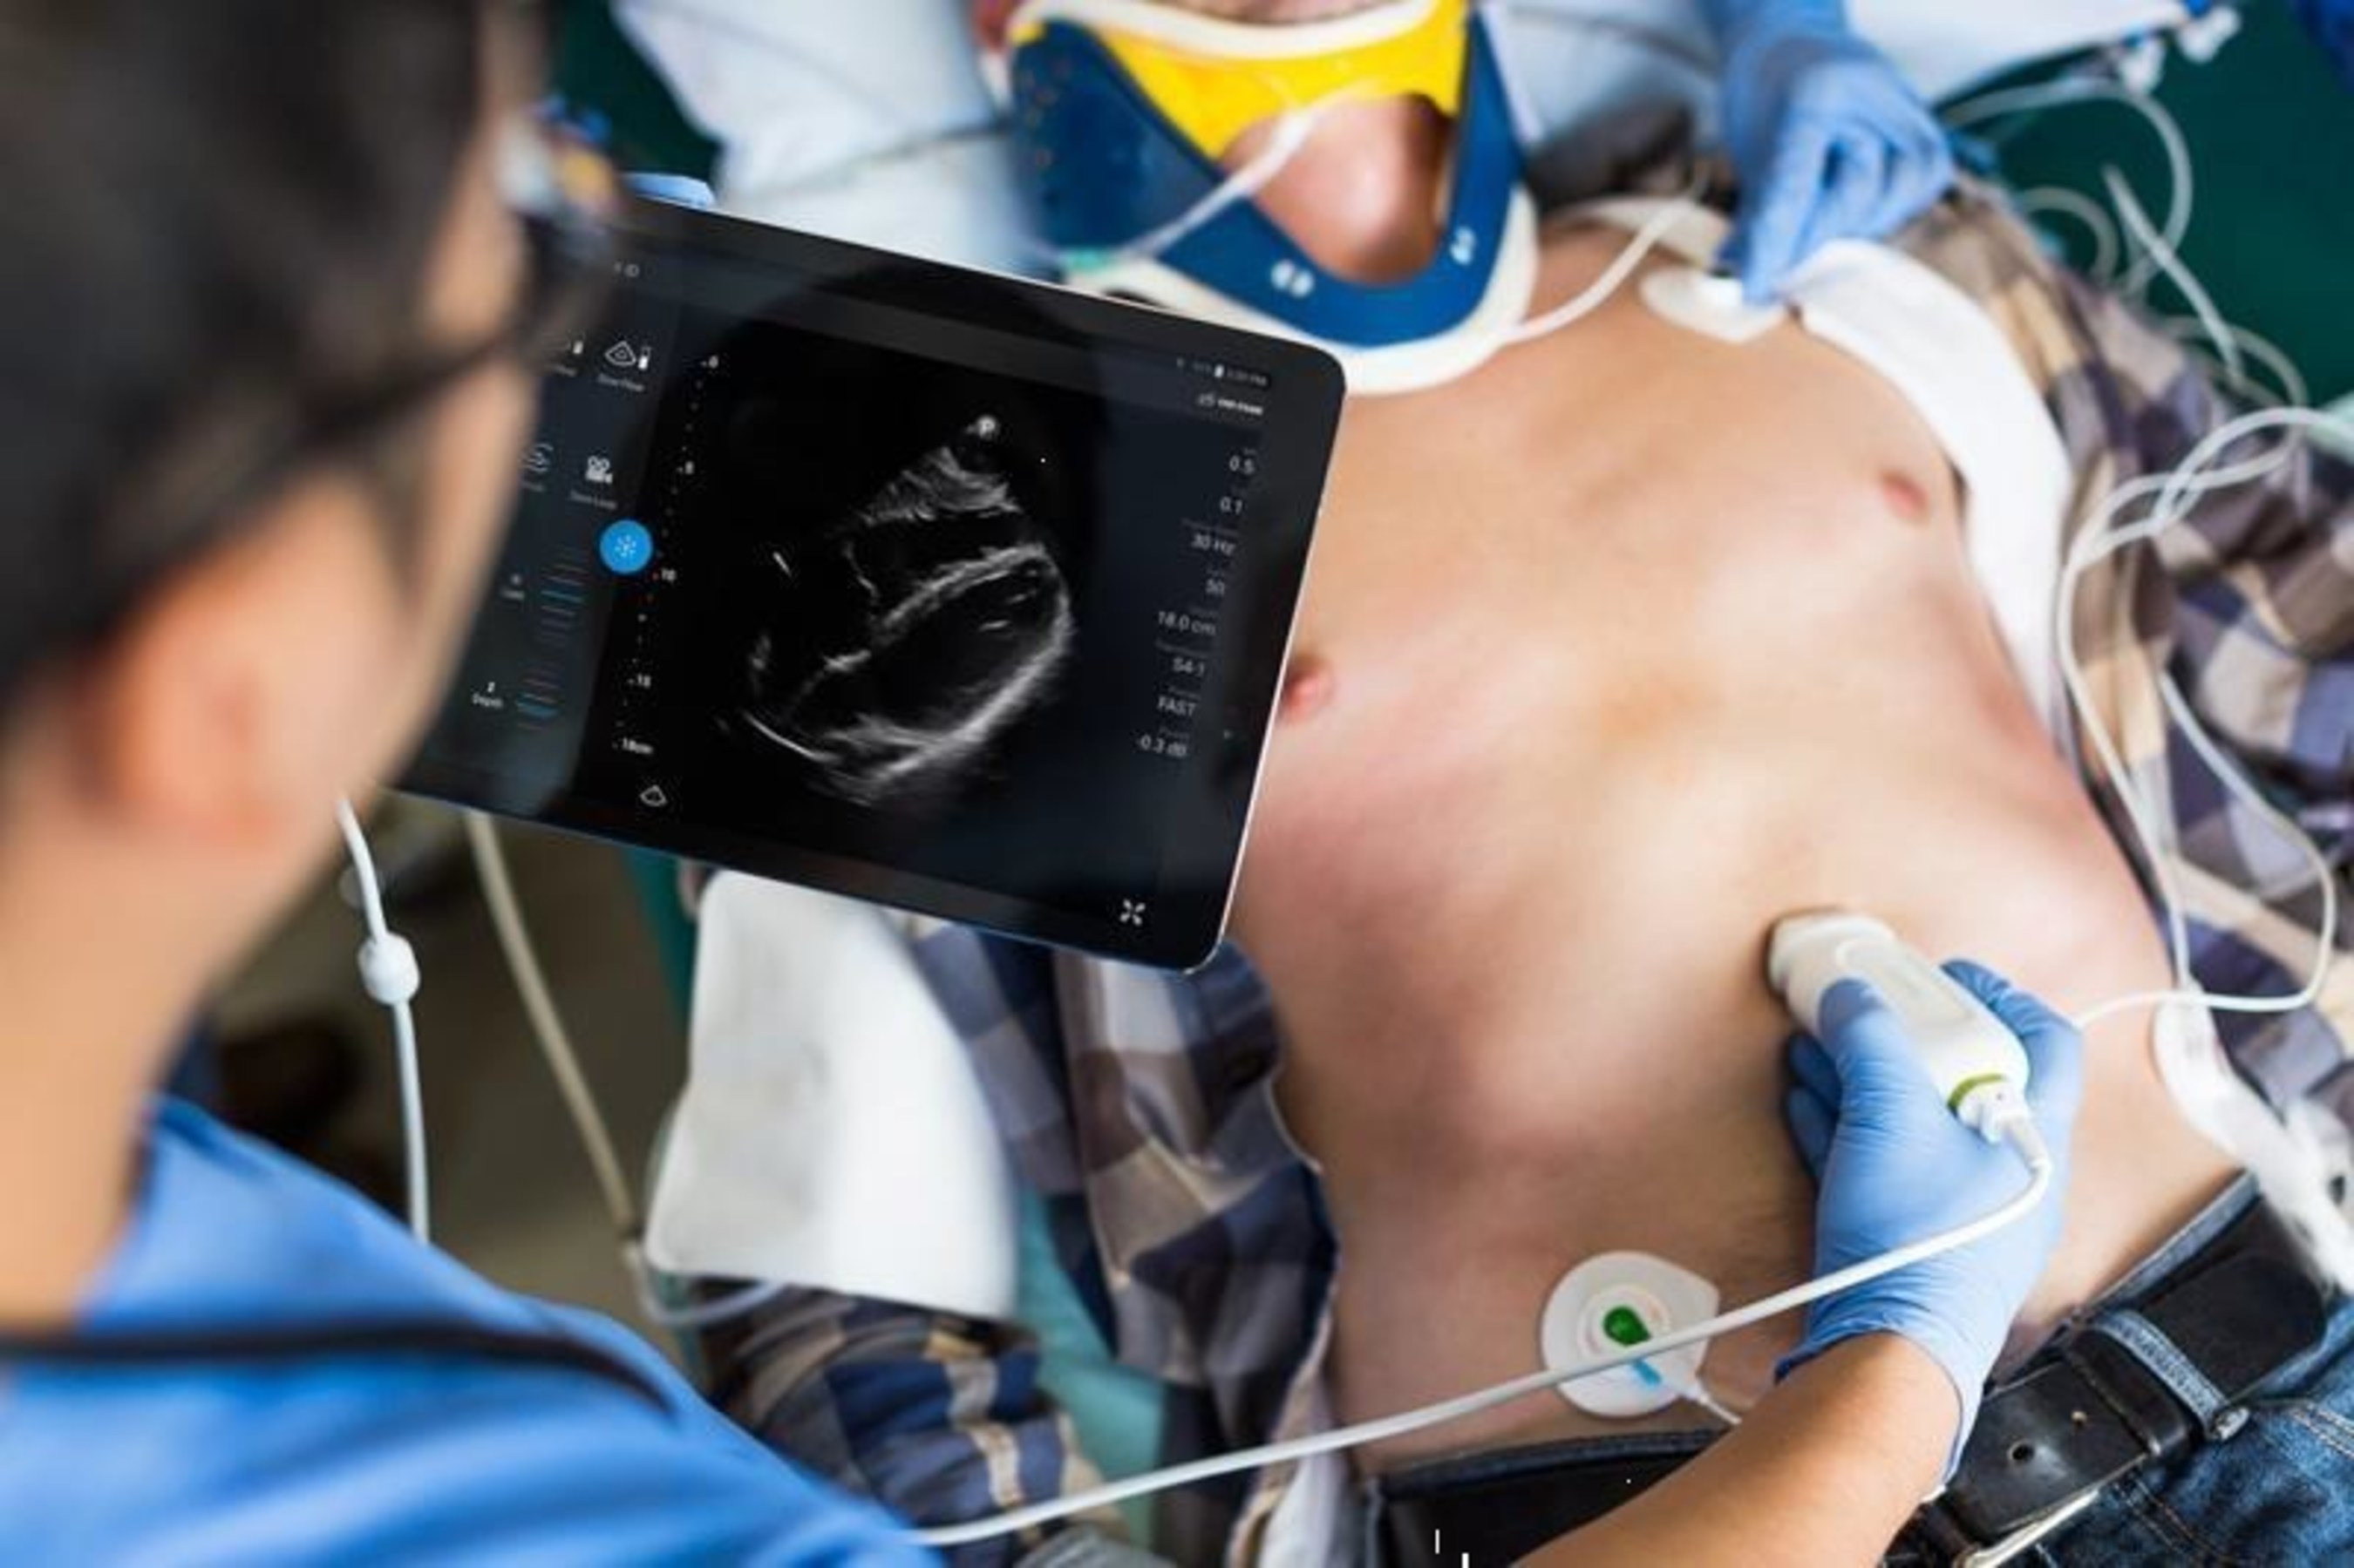 Philips' smart device powered ultrasound solution, Lumify, now includes the S4-1 phased array transducer, offering new capabilities, for emergency care situations.